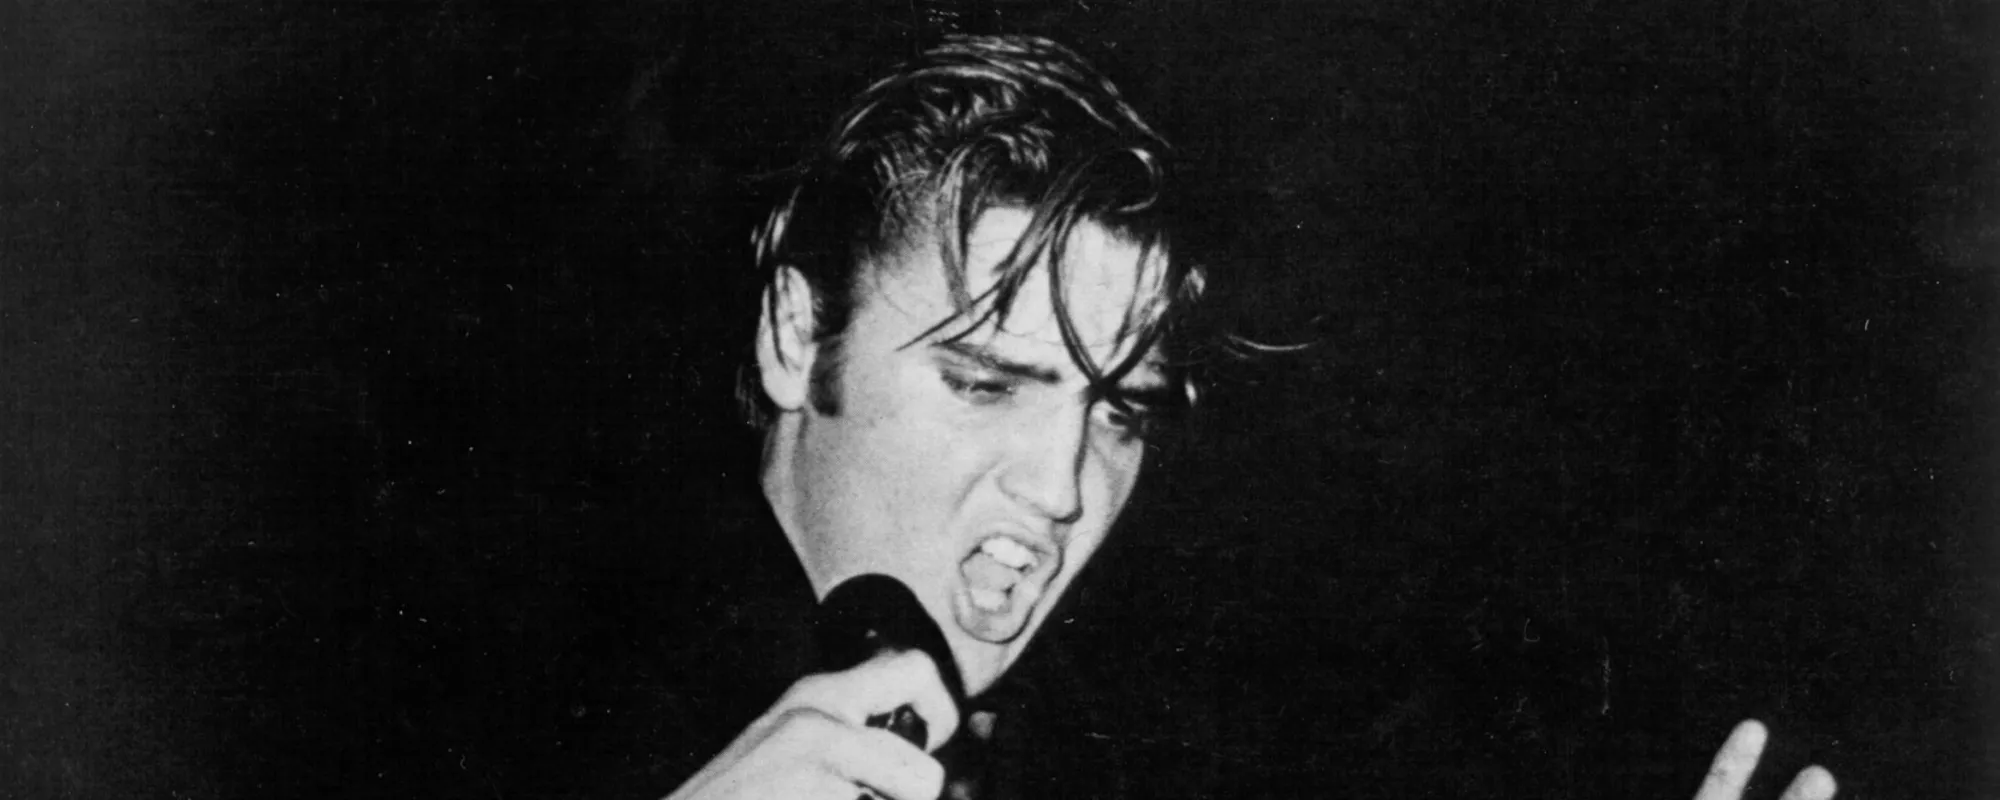 Elvis Presley Once Revealed His Thoughts on KISS: “Keep it Simple, Stupid”